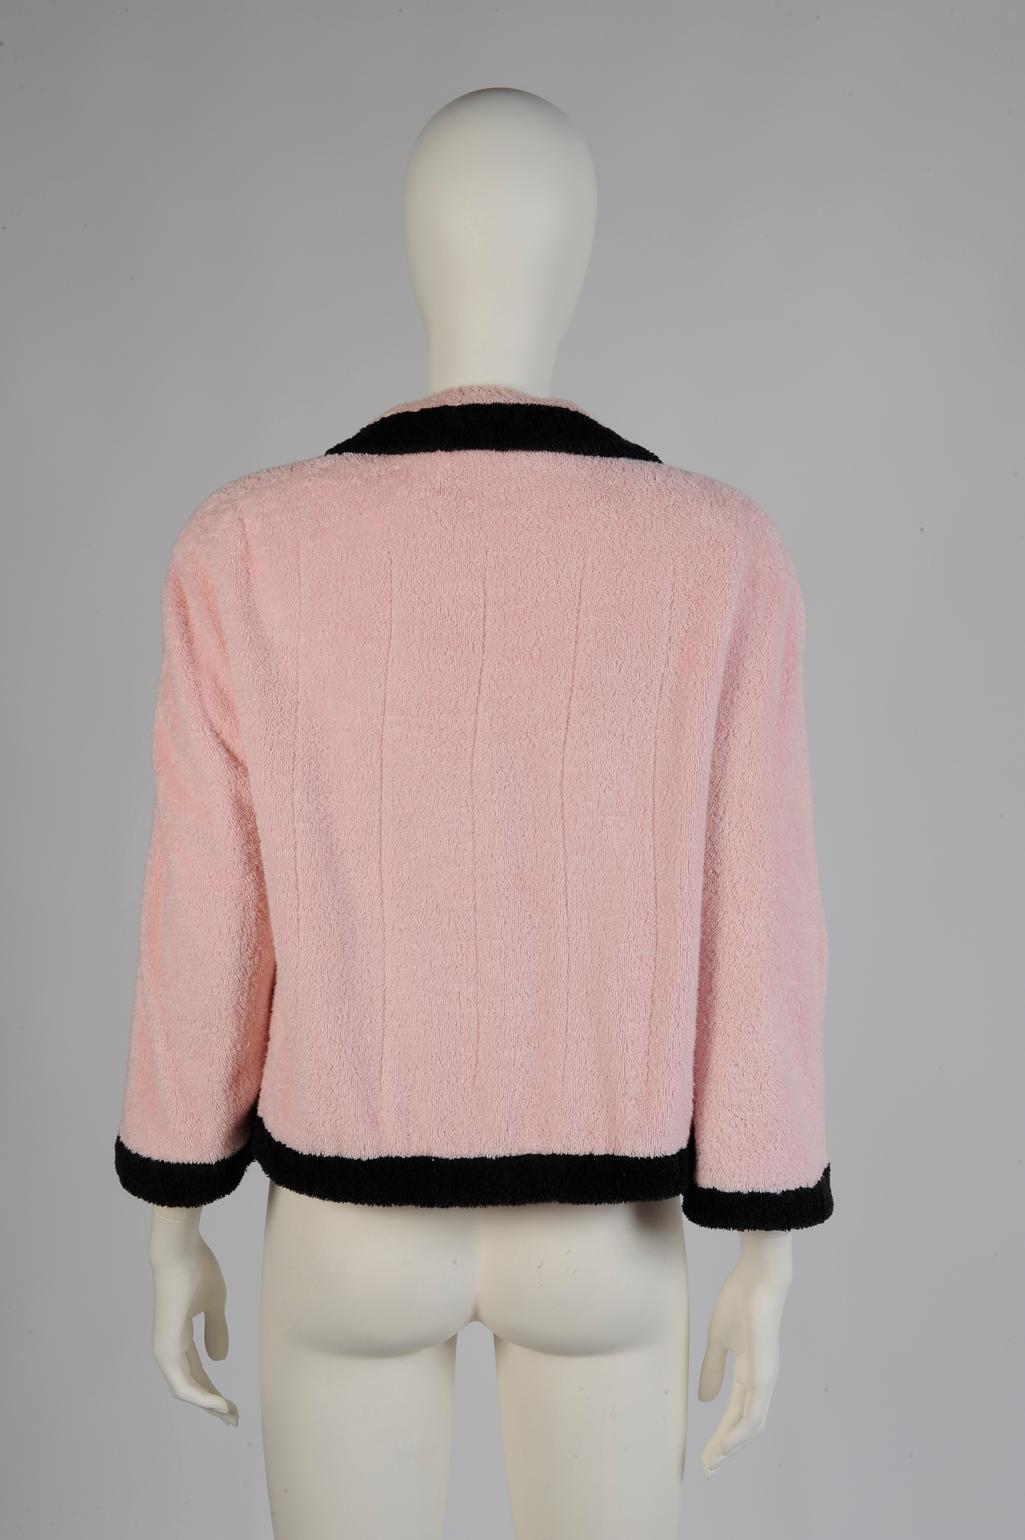 Chanel By Karl Lagerfeld Terry Cloth Runway Jacket, Spring-Summer 1992 3